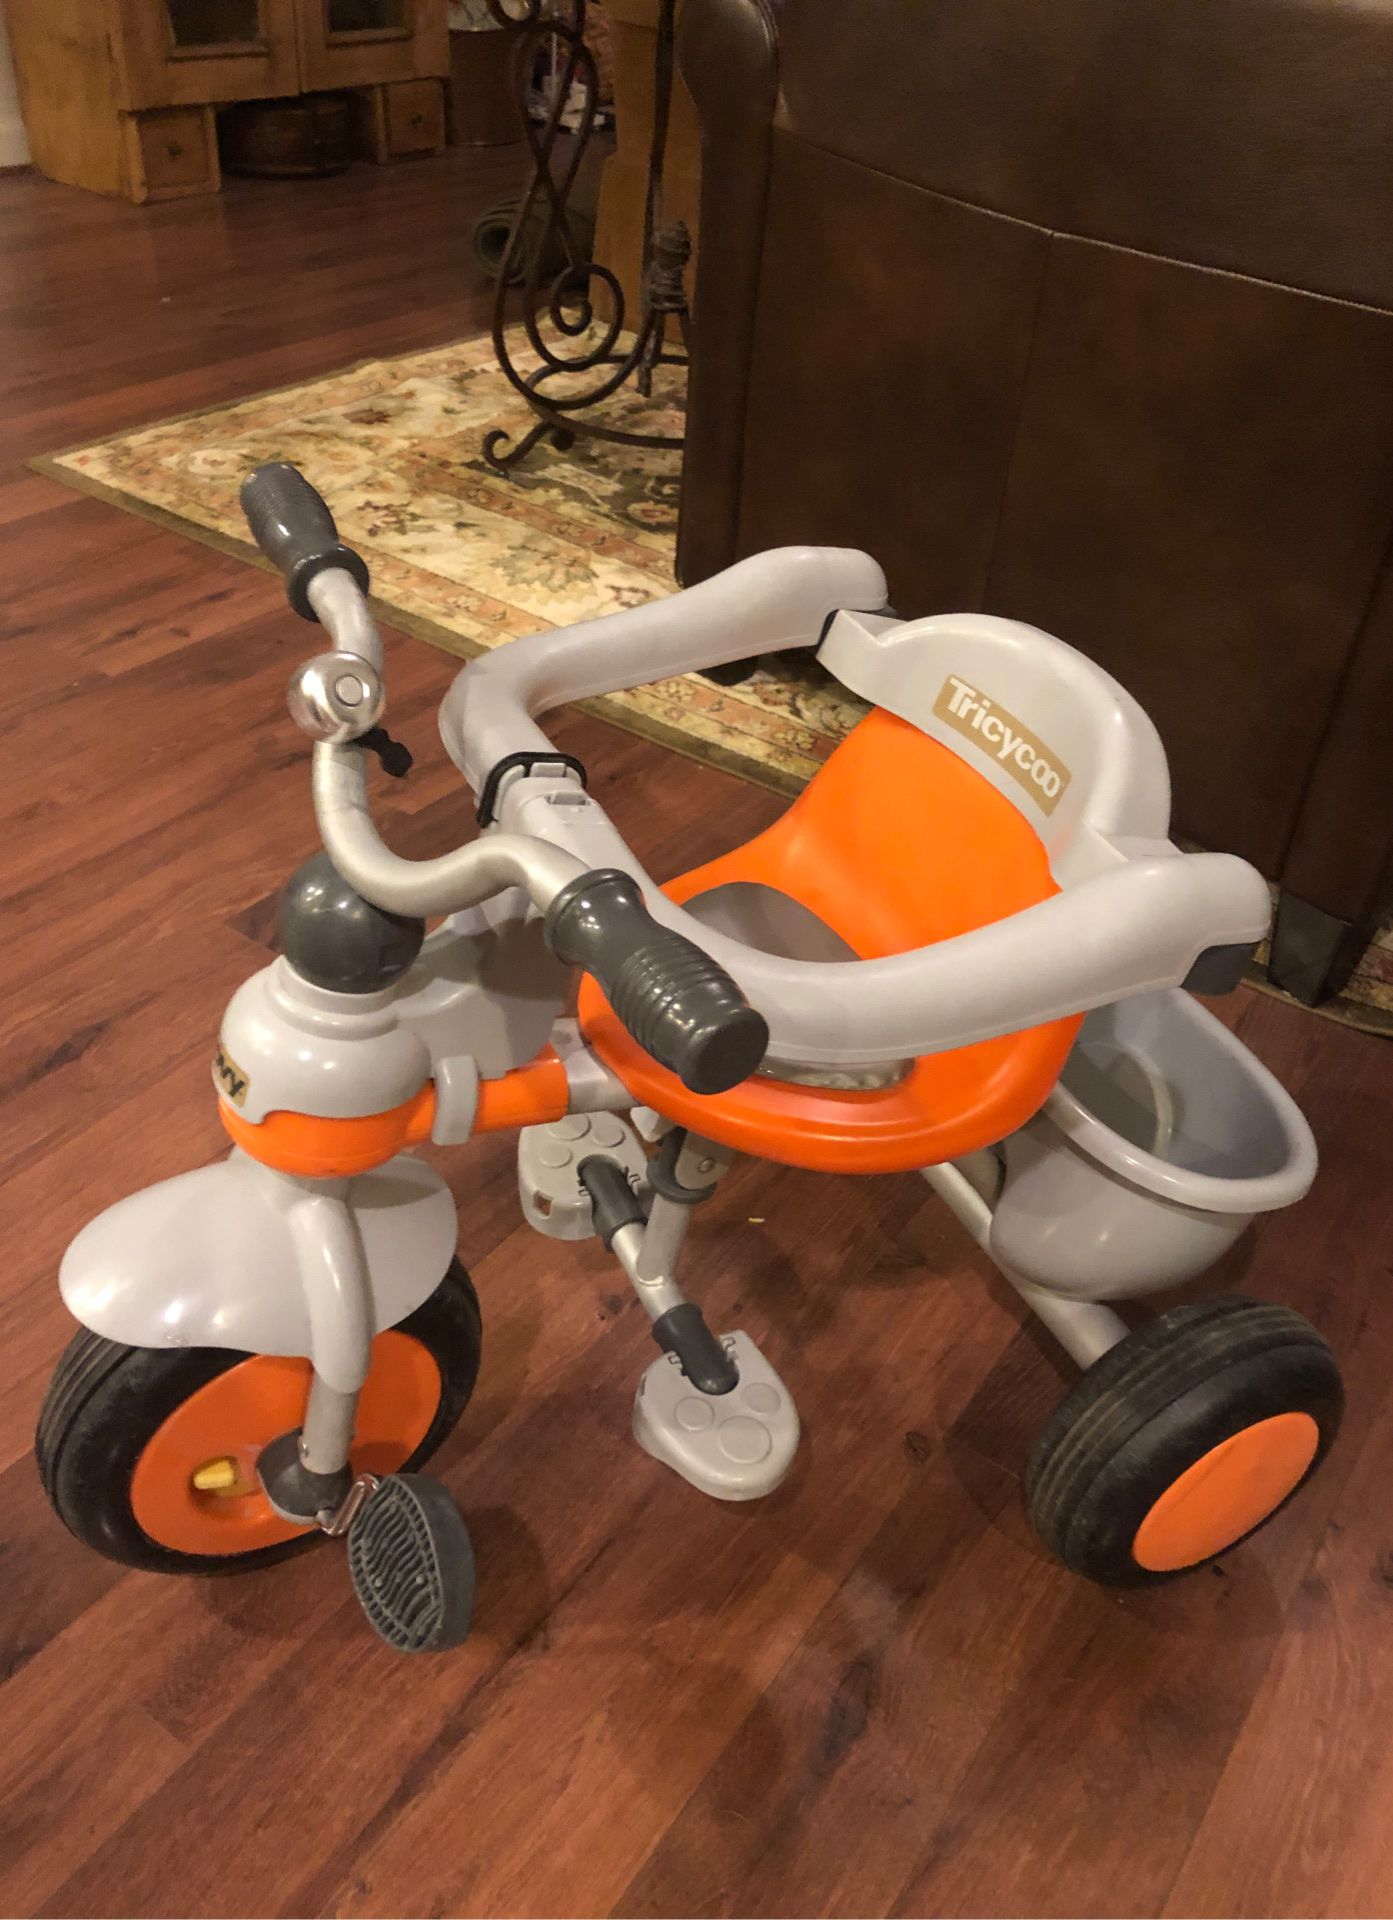 Joovy Tricycoo trike tricycle- for toddlers - great first bike